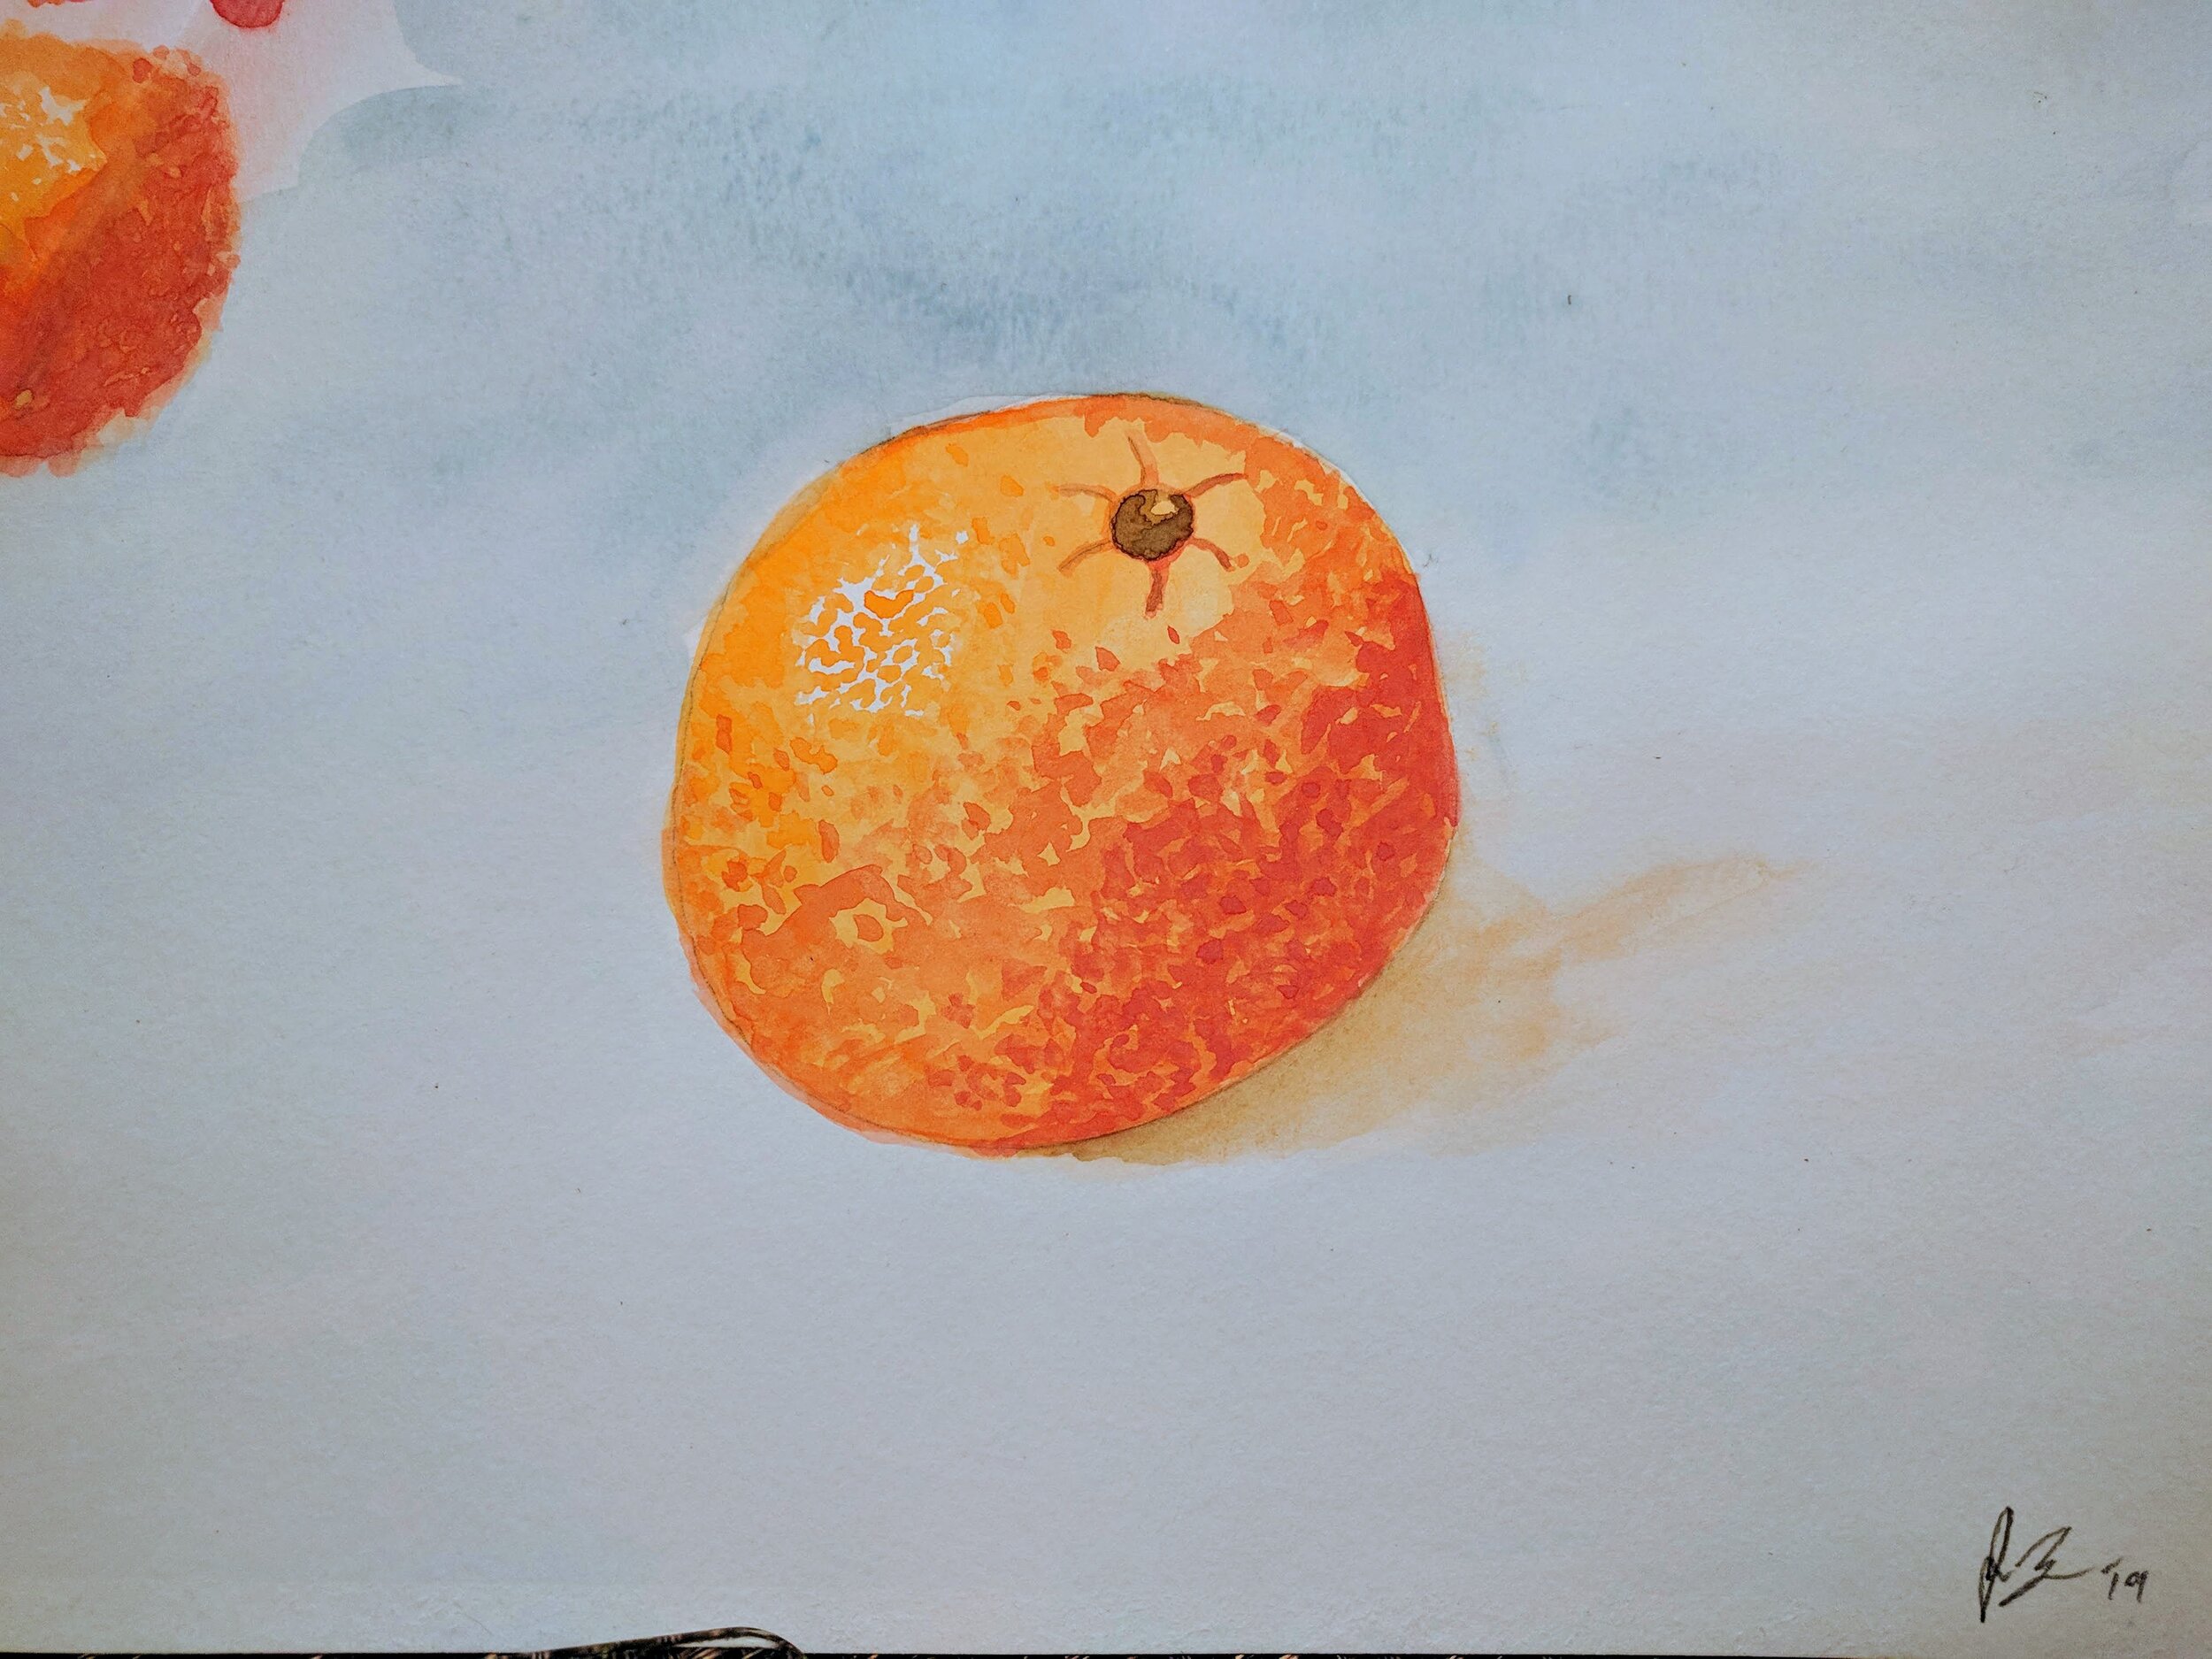  Still life of an orange.  I hope that was obvious. 